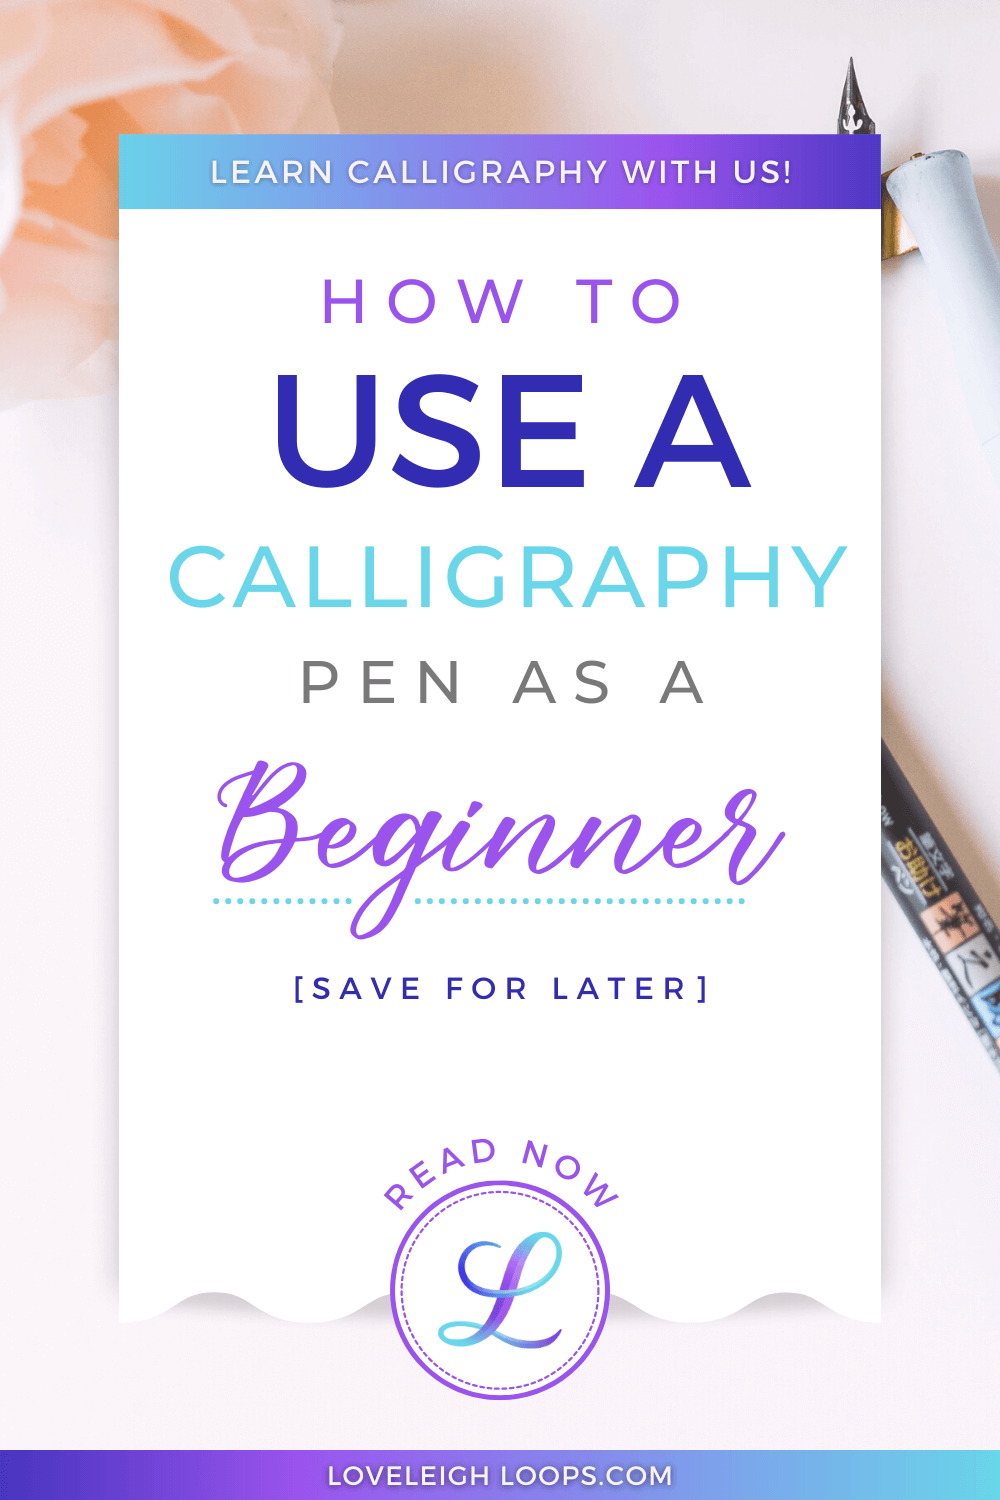 Calligraphy Kit - Optional Add-on for The Ultimate Calligraphy